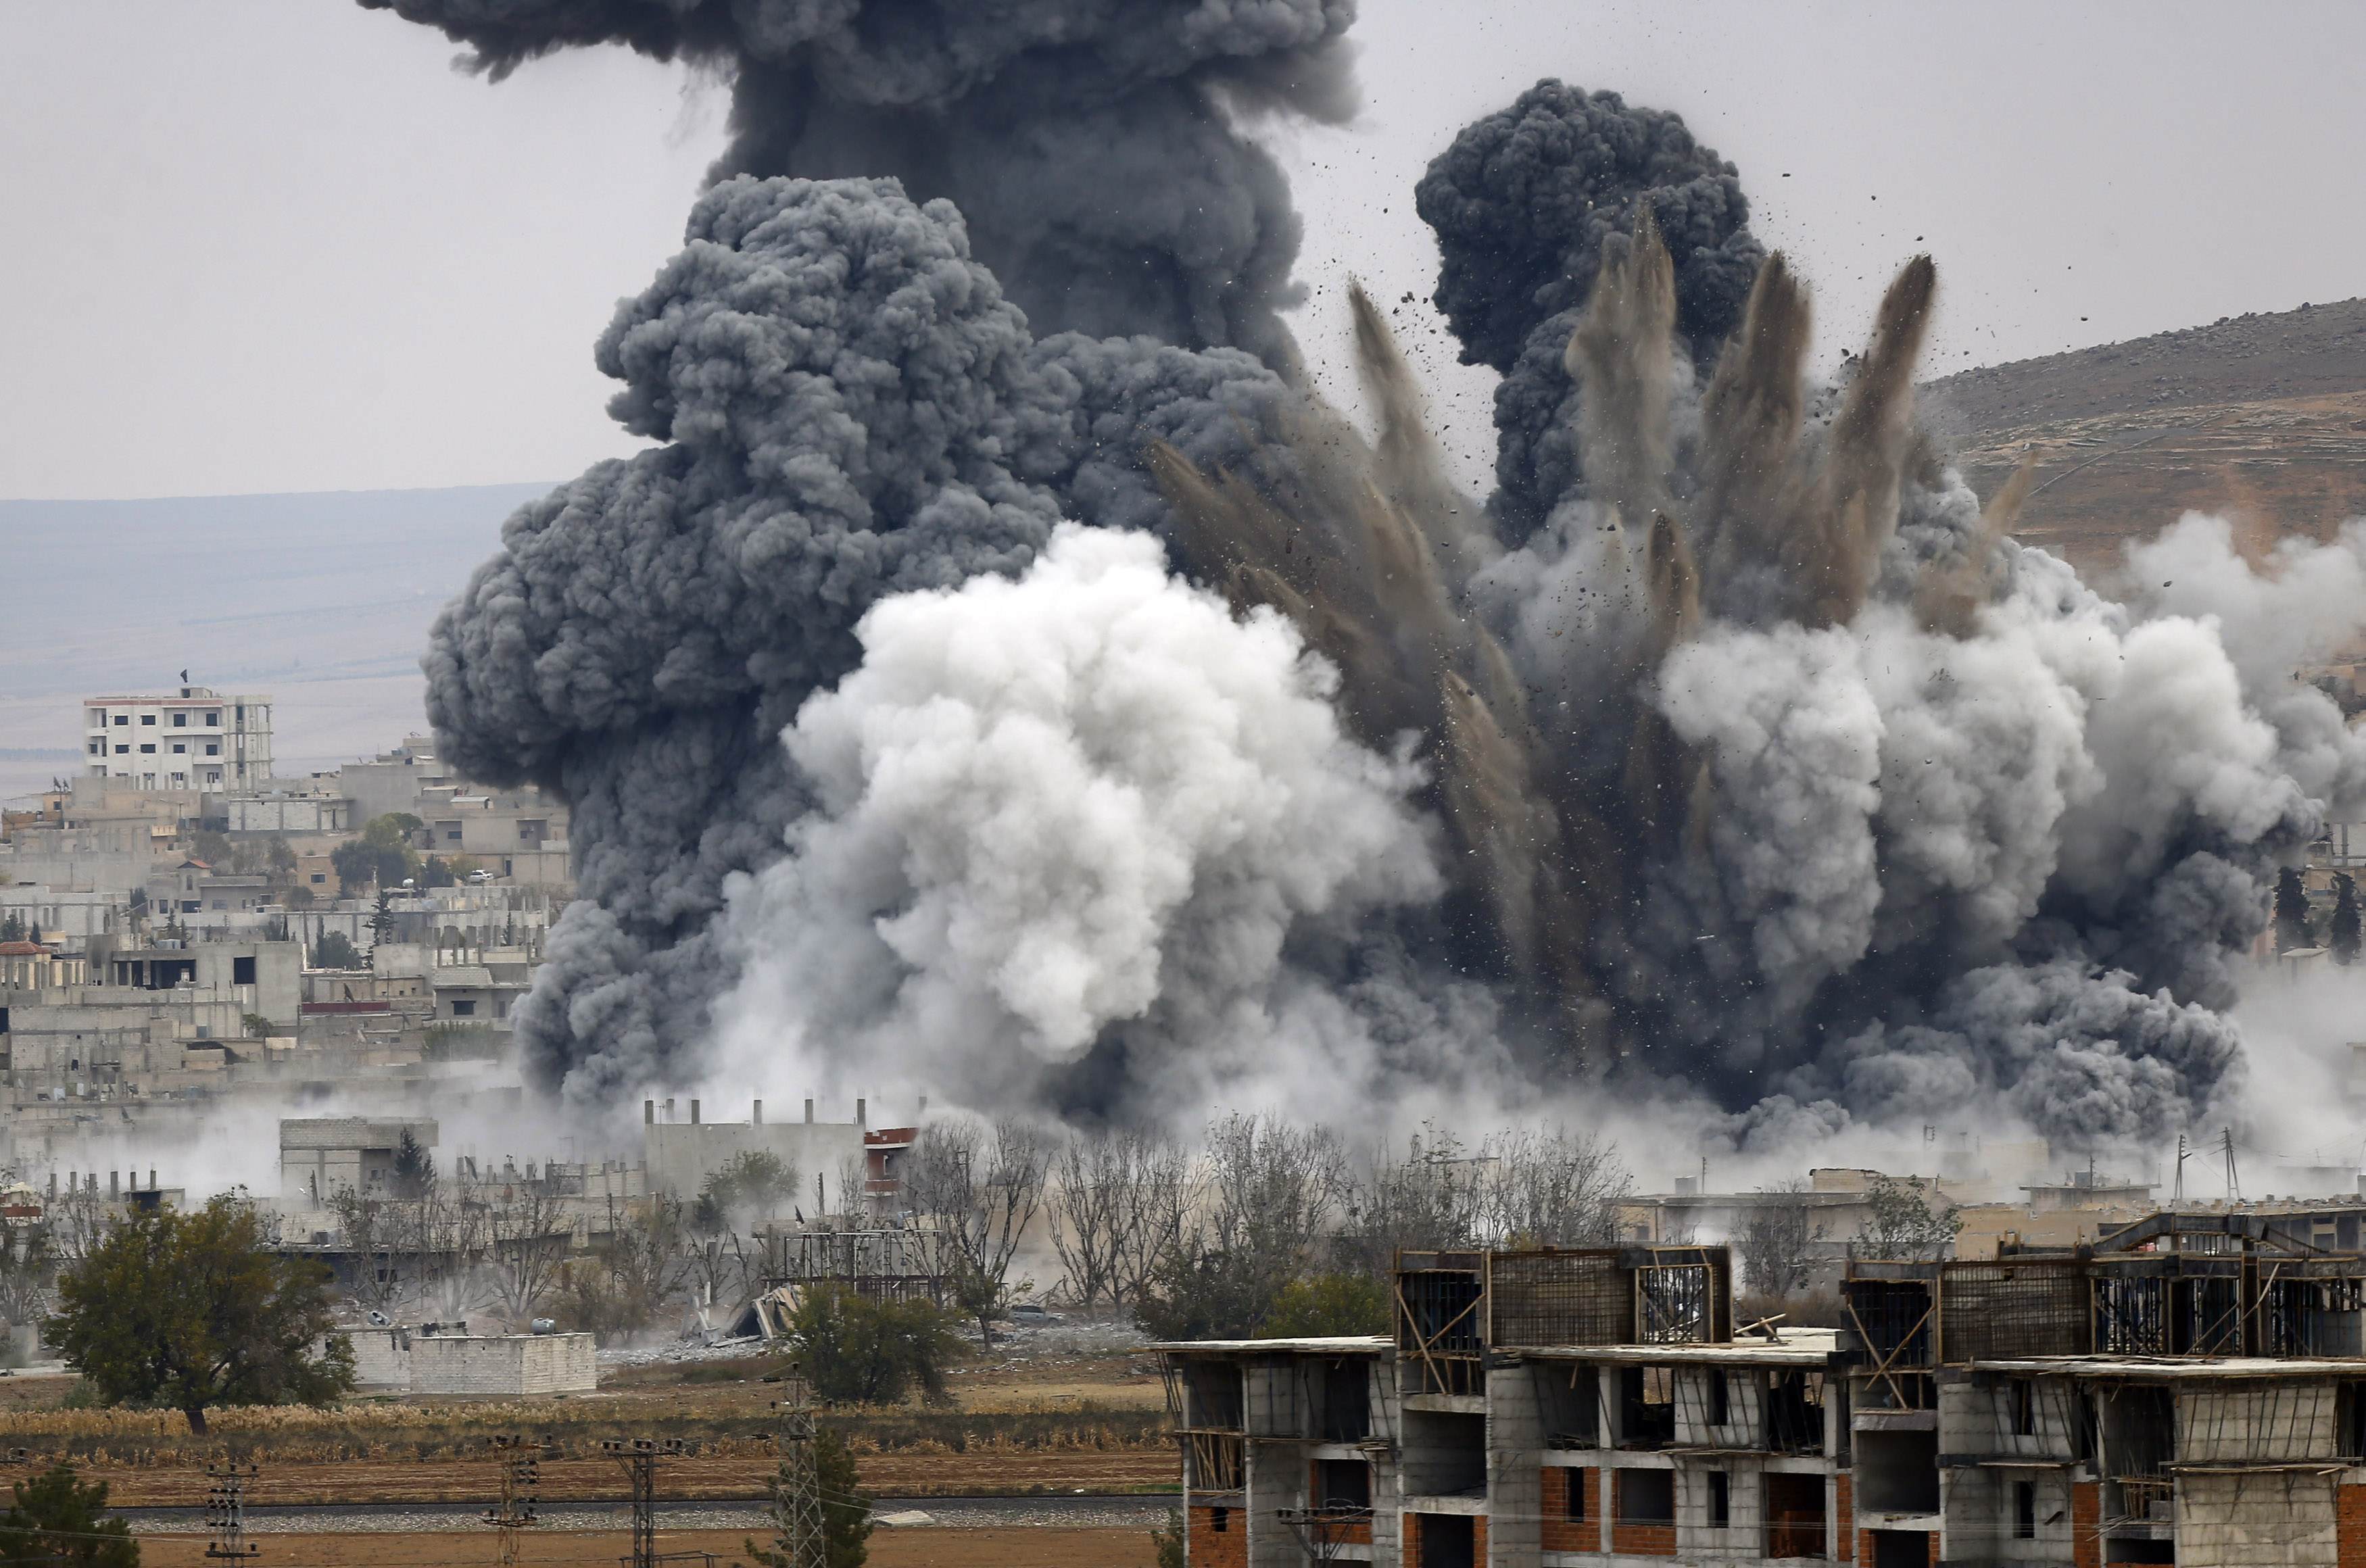 An explosion following an air strike is seen in central Kobani in Syria, November 17, 2014. Picture taken from the Turkish side of the Turkish-Syrian border. REUTERS/Osman Orsal (TURKEY - Tags: POLITICS MILITARY CONFLICT TPX IMAGES OF THE DAY)